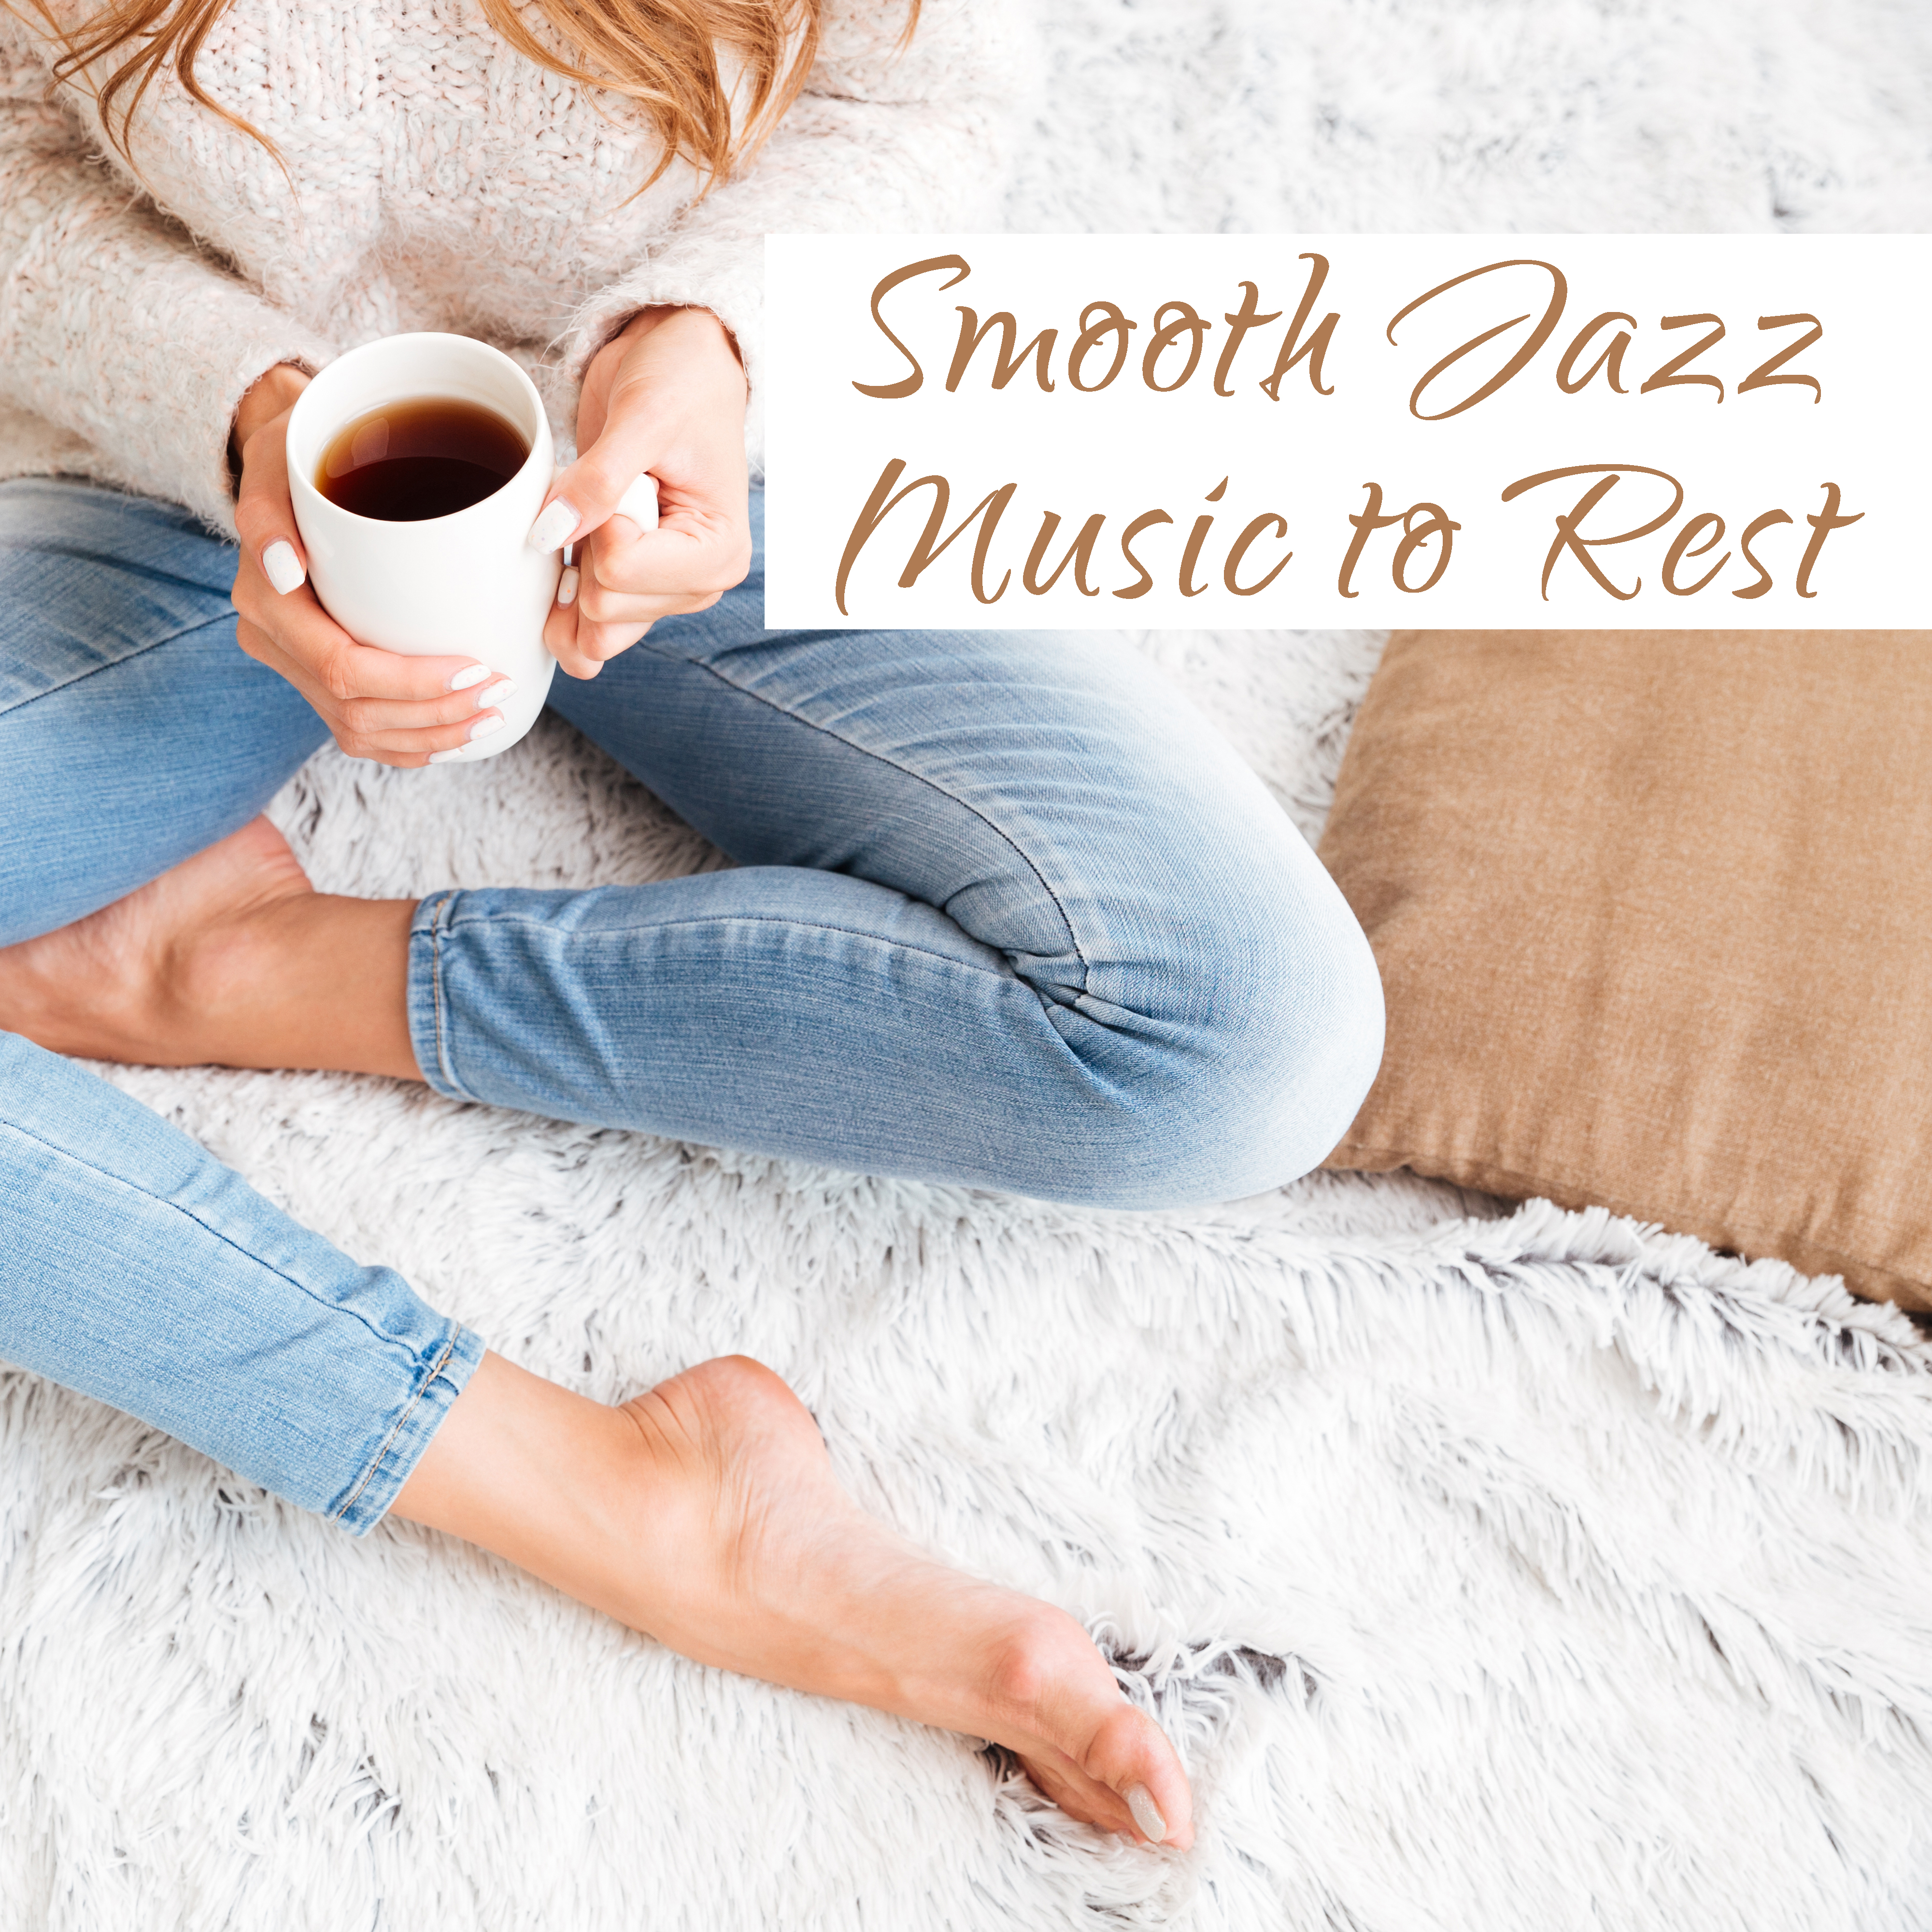 Smooth Jazz Music to Rest  Easy Listening, Piano Bar, Moonlight Jazz, Soothing Melodies